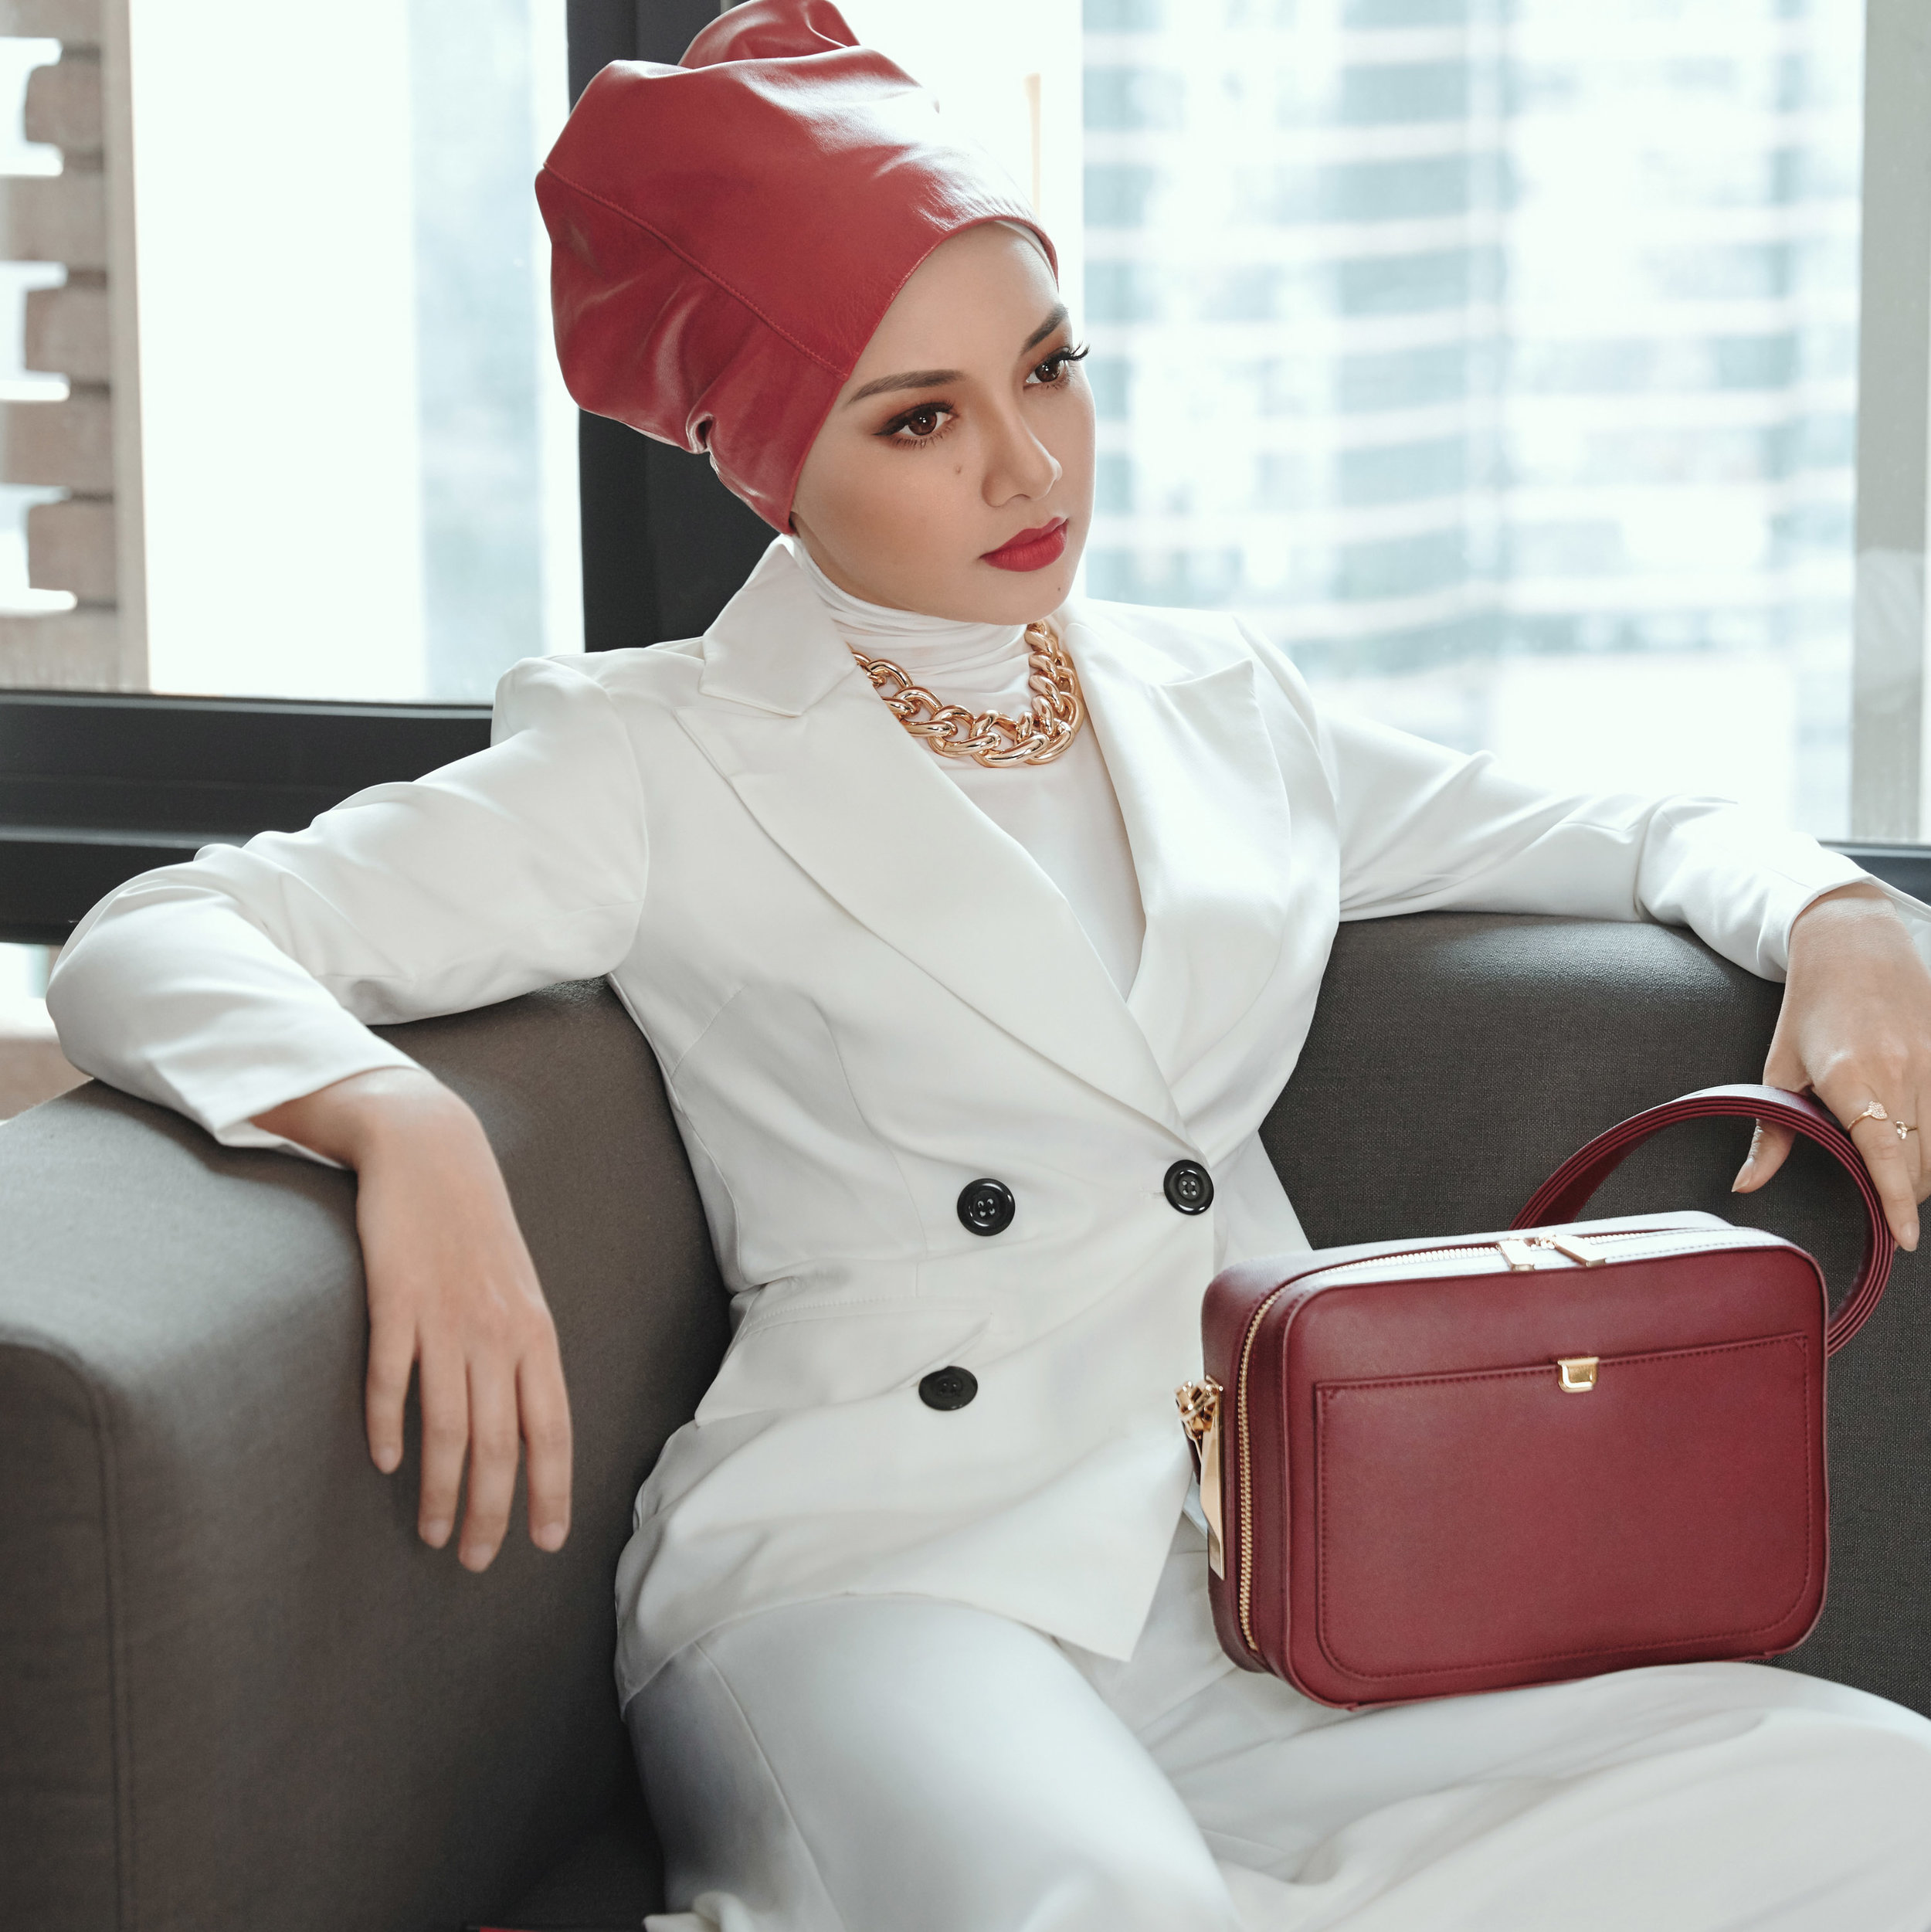 Exclusive Interview With Celebrity Neelofa On Her Lofarbag Collection With Sometime By Asian Designers Thread By Zalora Malaysia